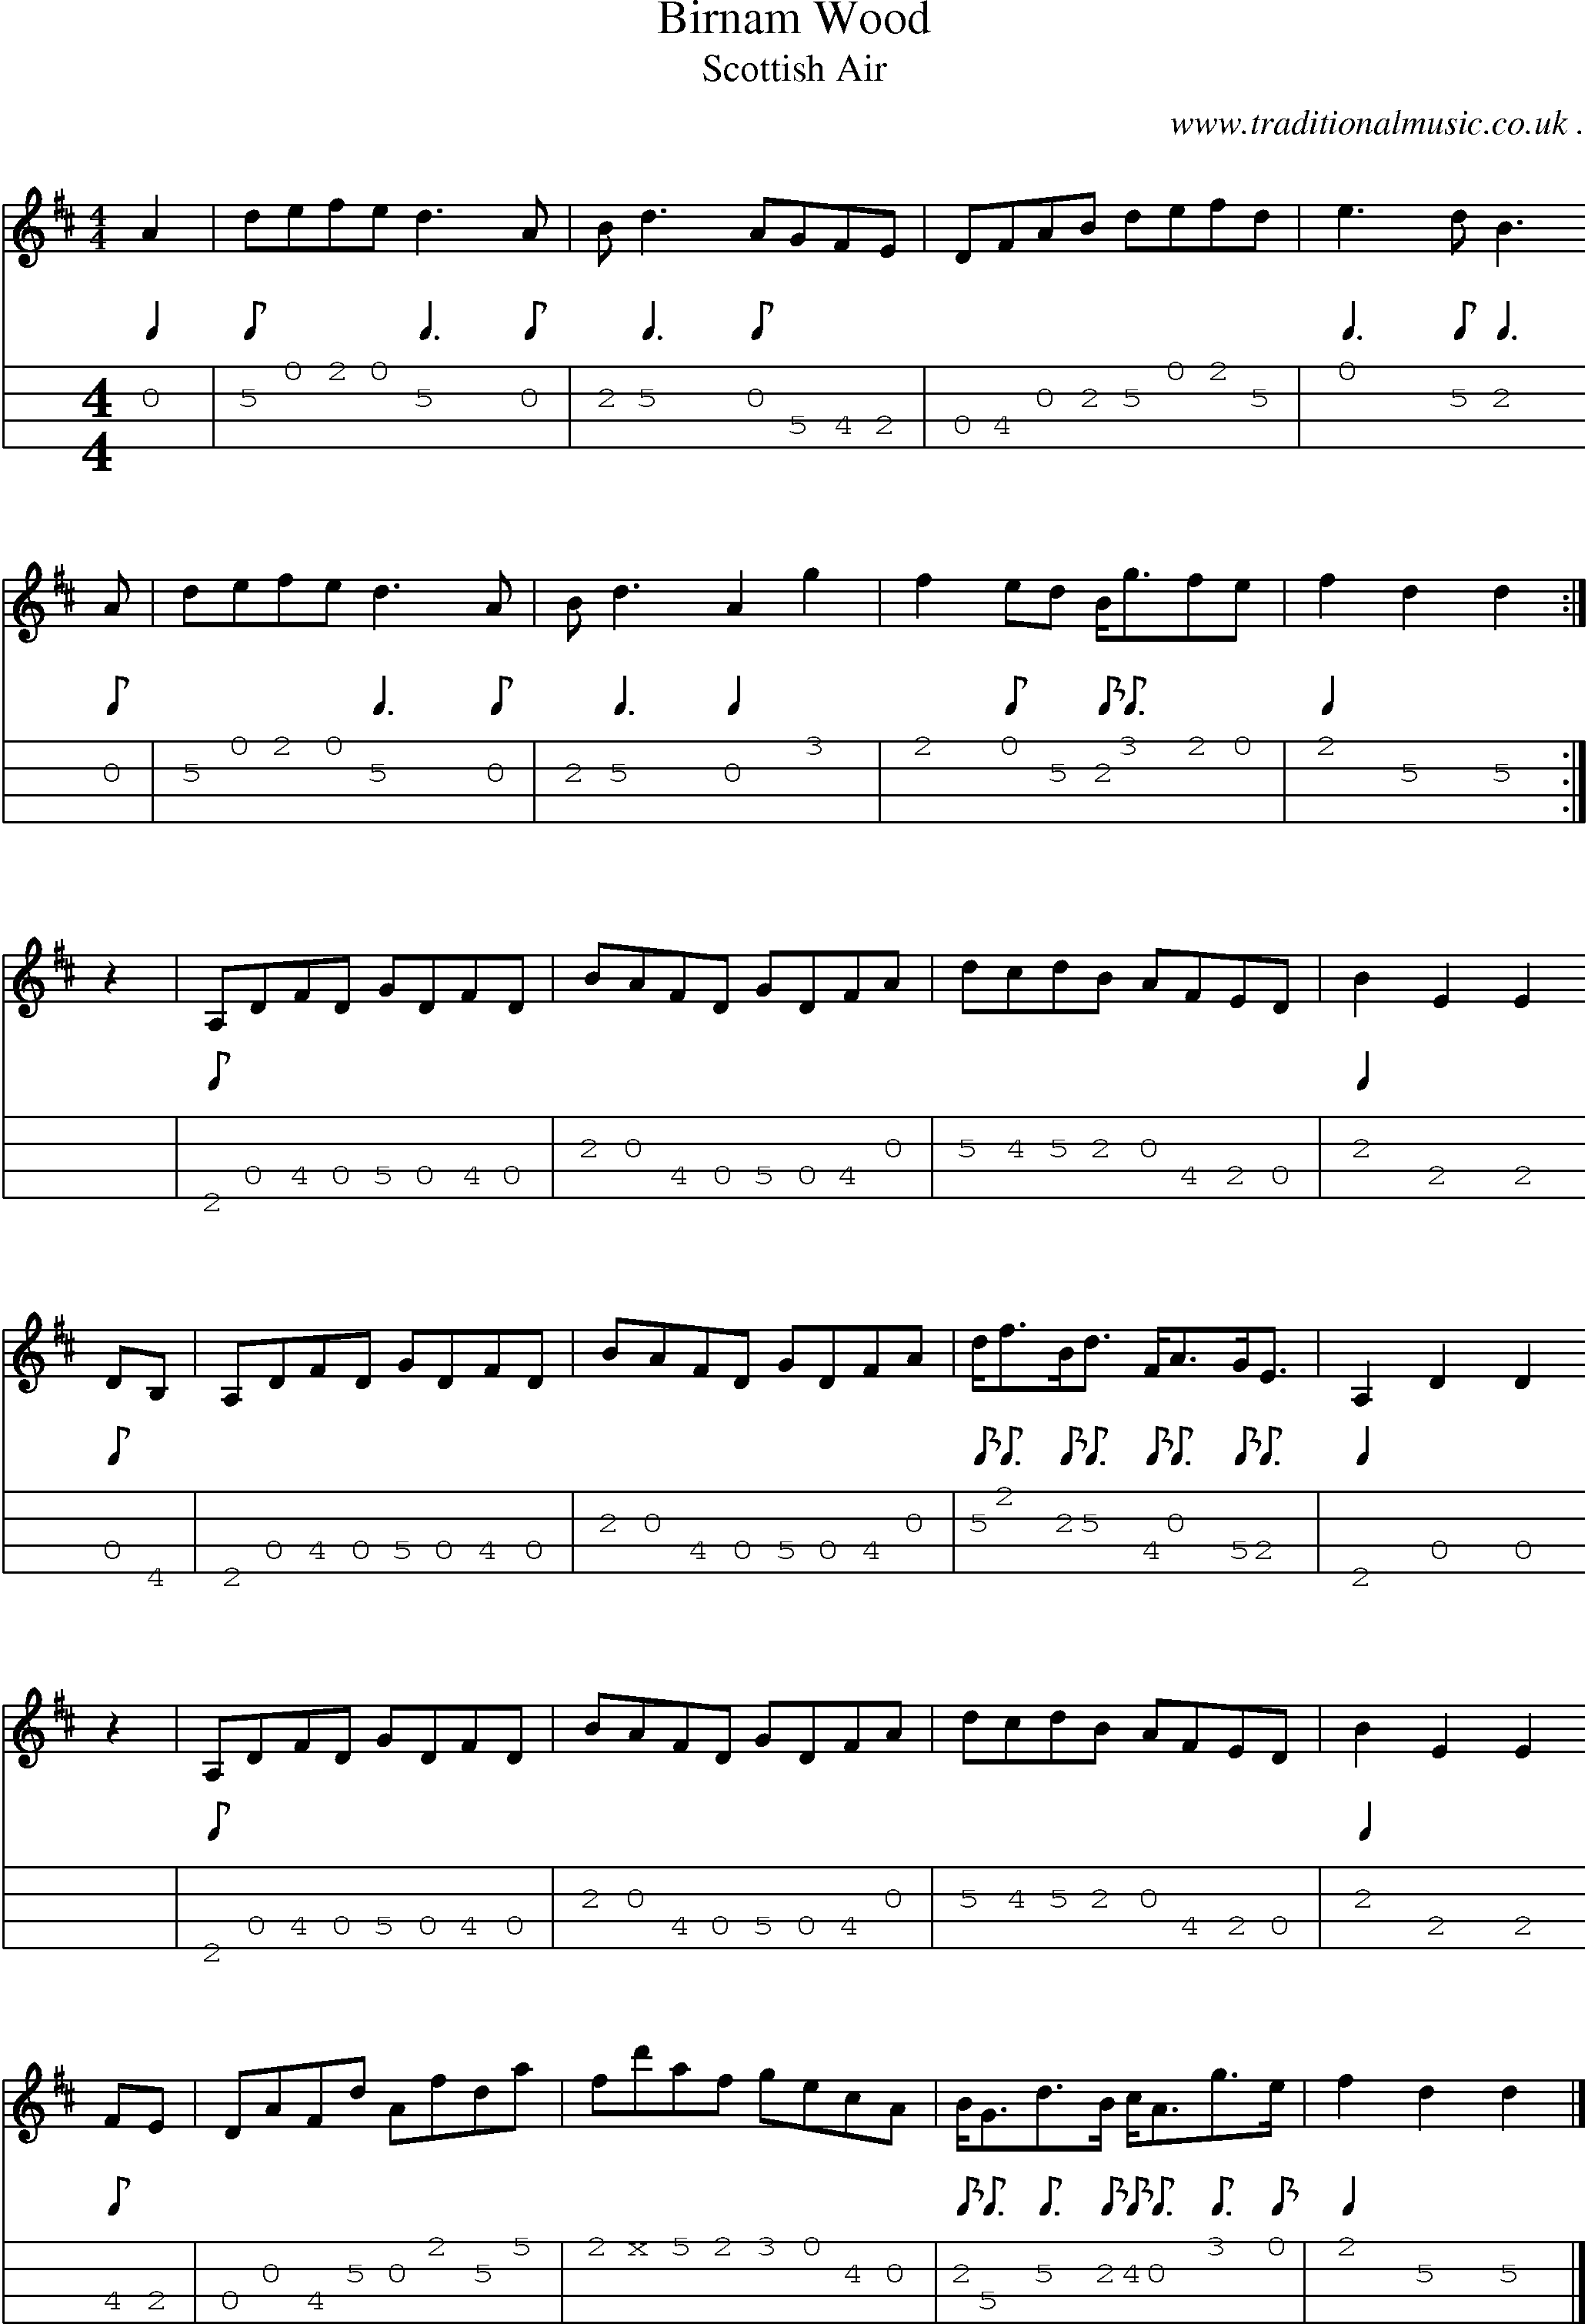 Sheet-music  score, Chords and Mandolin Tabs for Birnam Wood